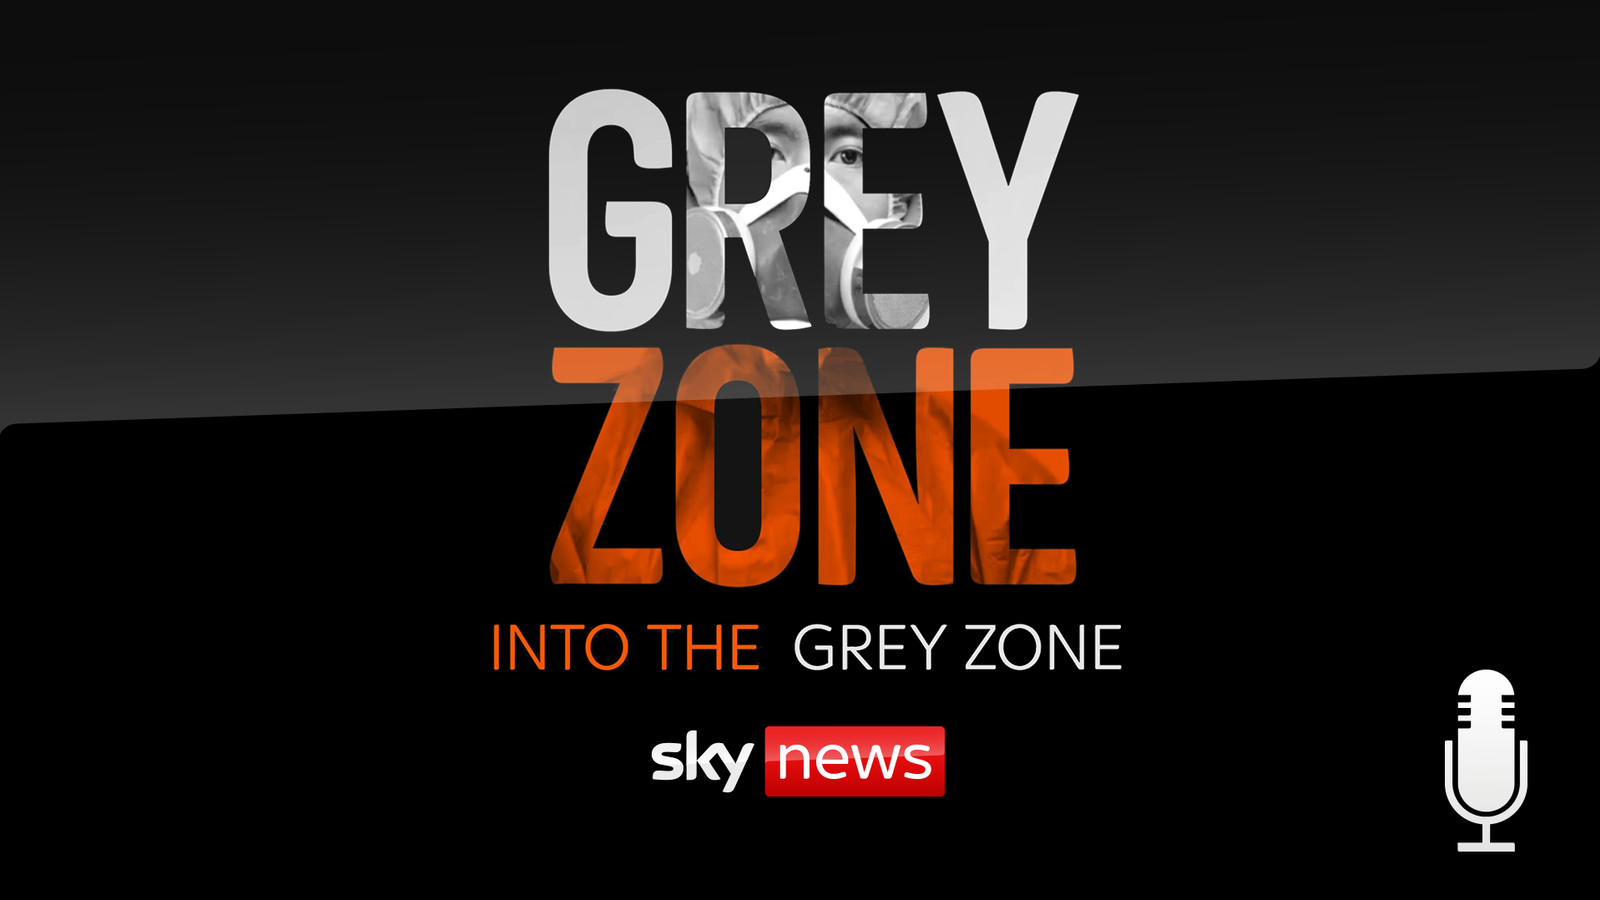 skynews into the grey zone 5404163 png?20210603144748.